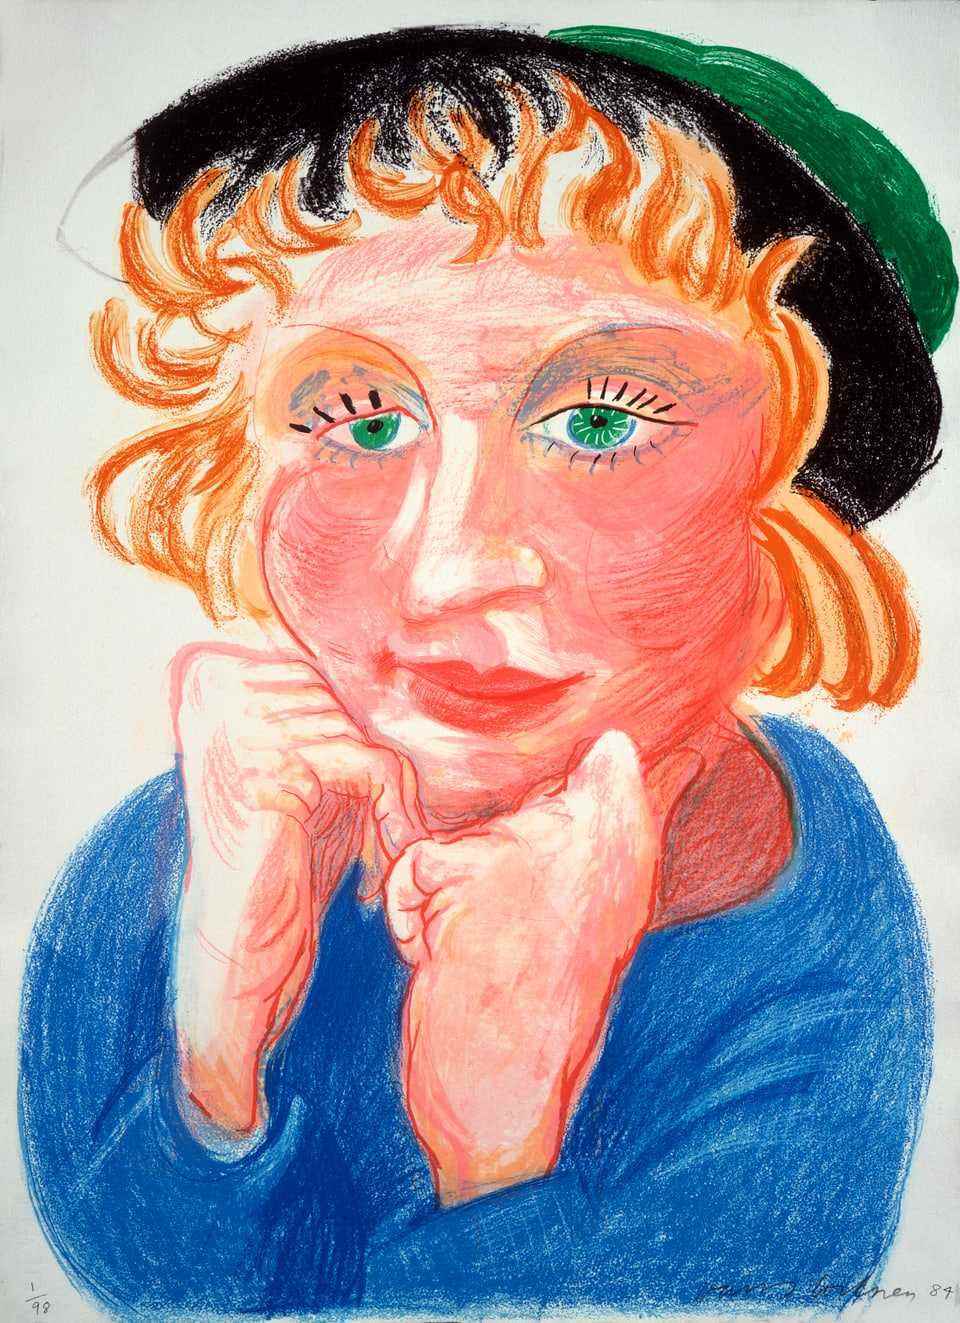 Image of a redhead woman in a green hat